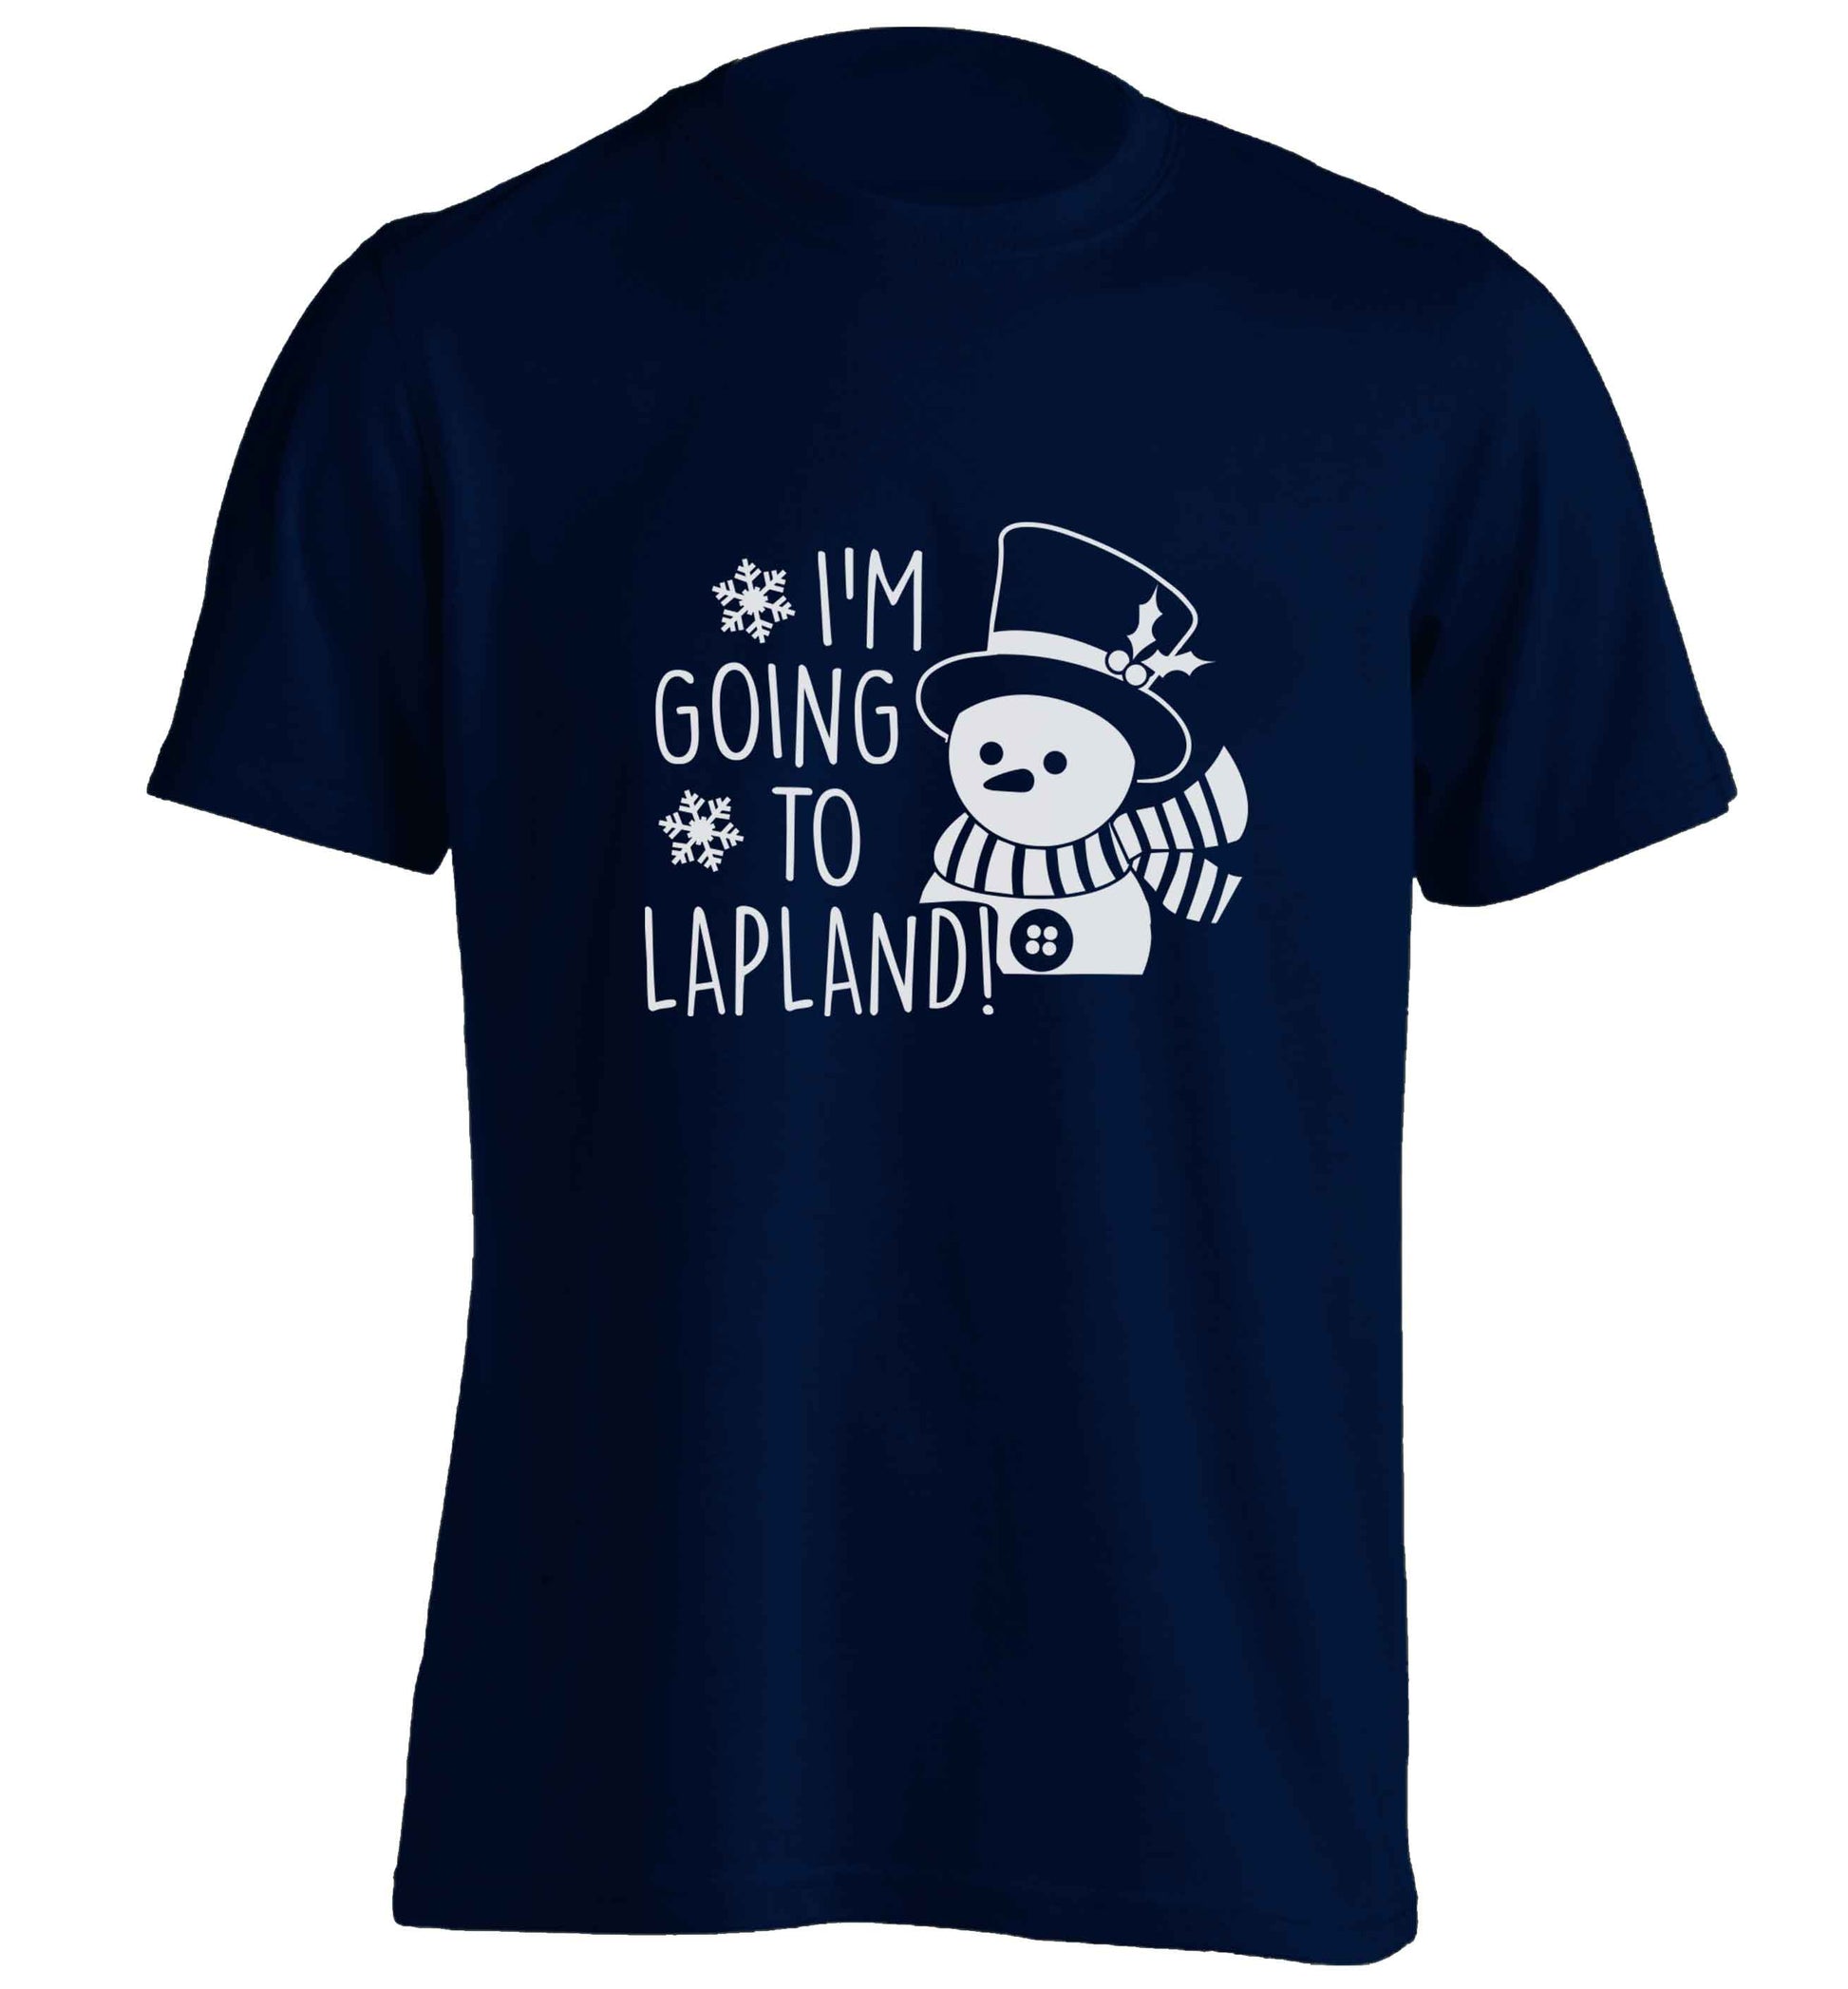 I'm going to Lapland adults unisex navy Tshirt 2XL